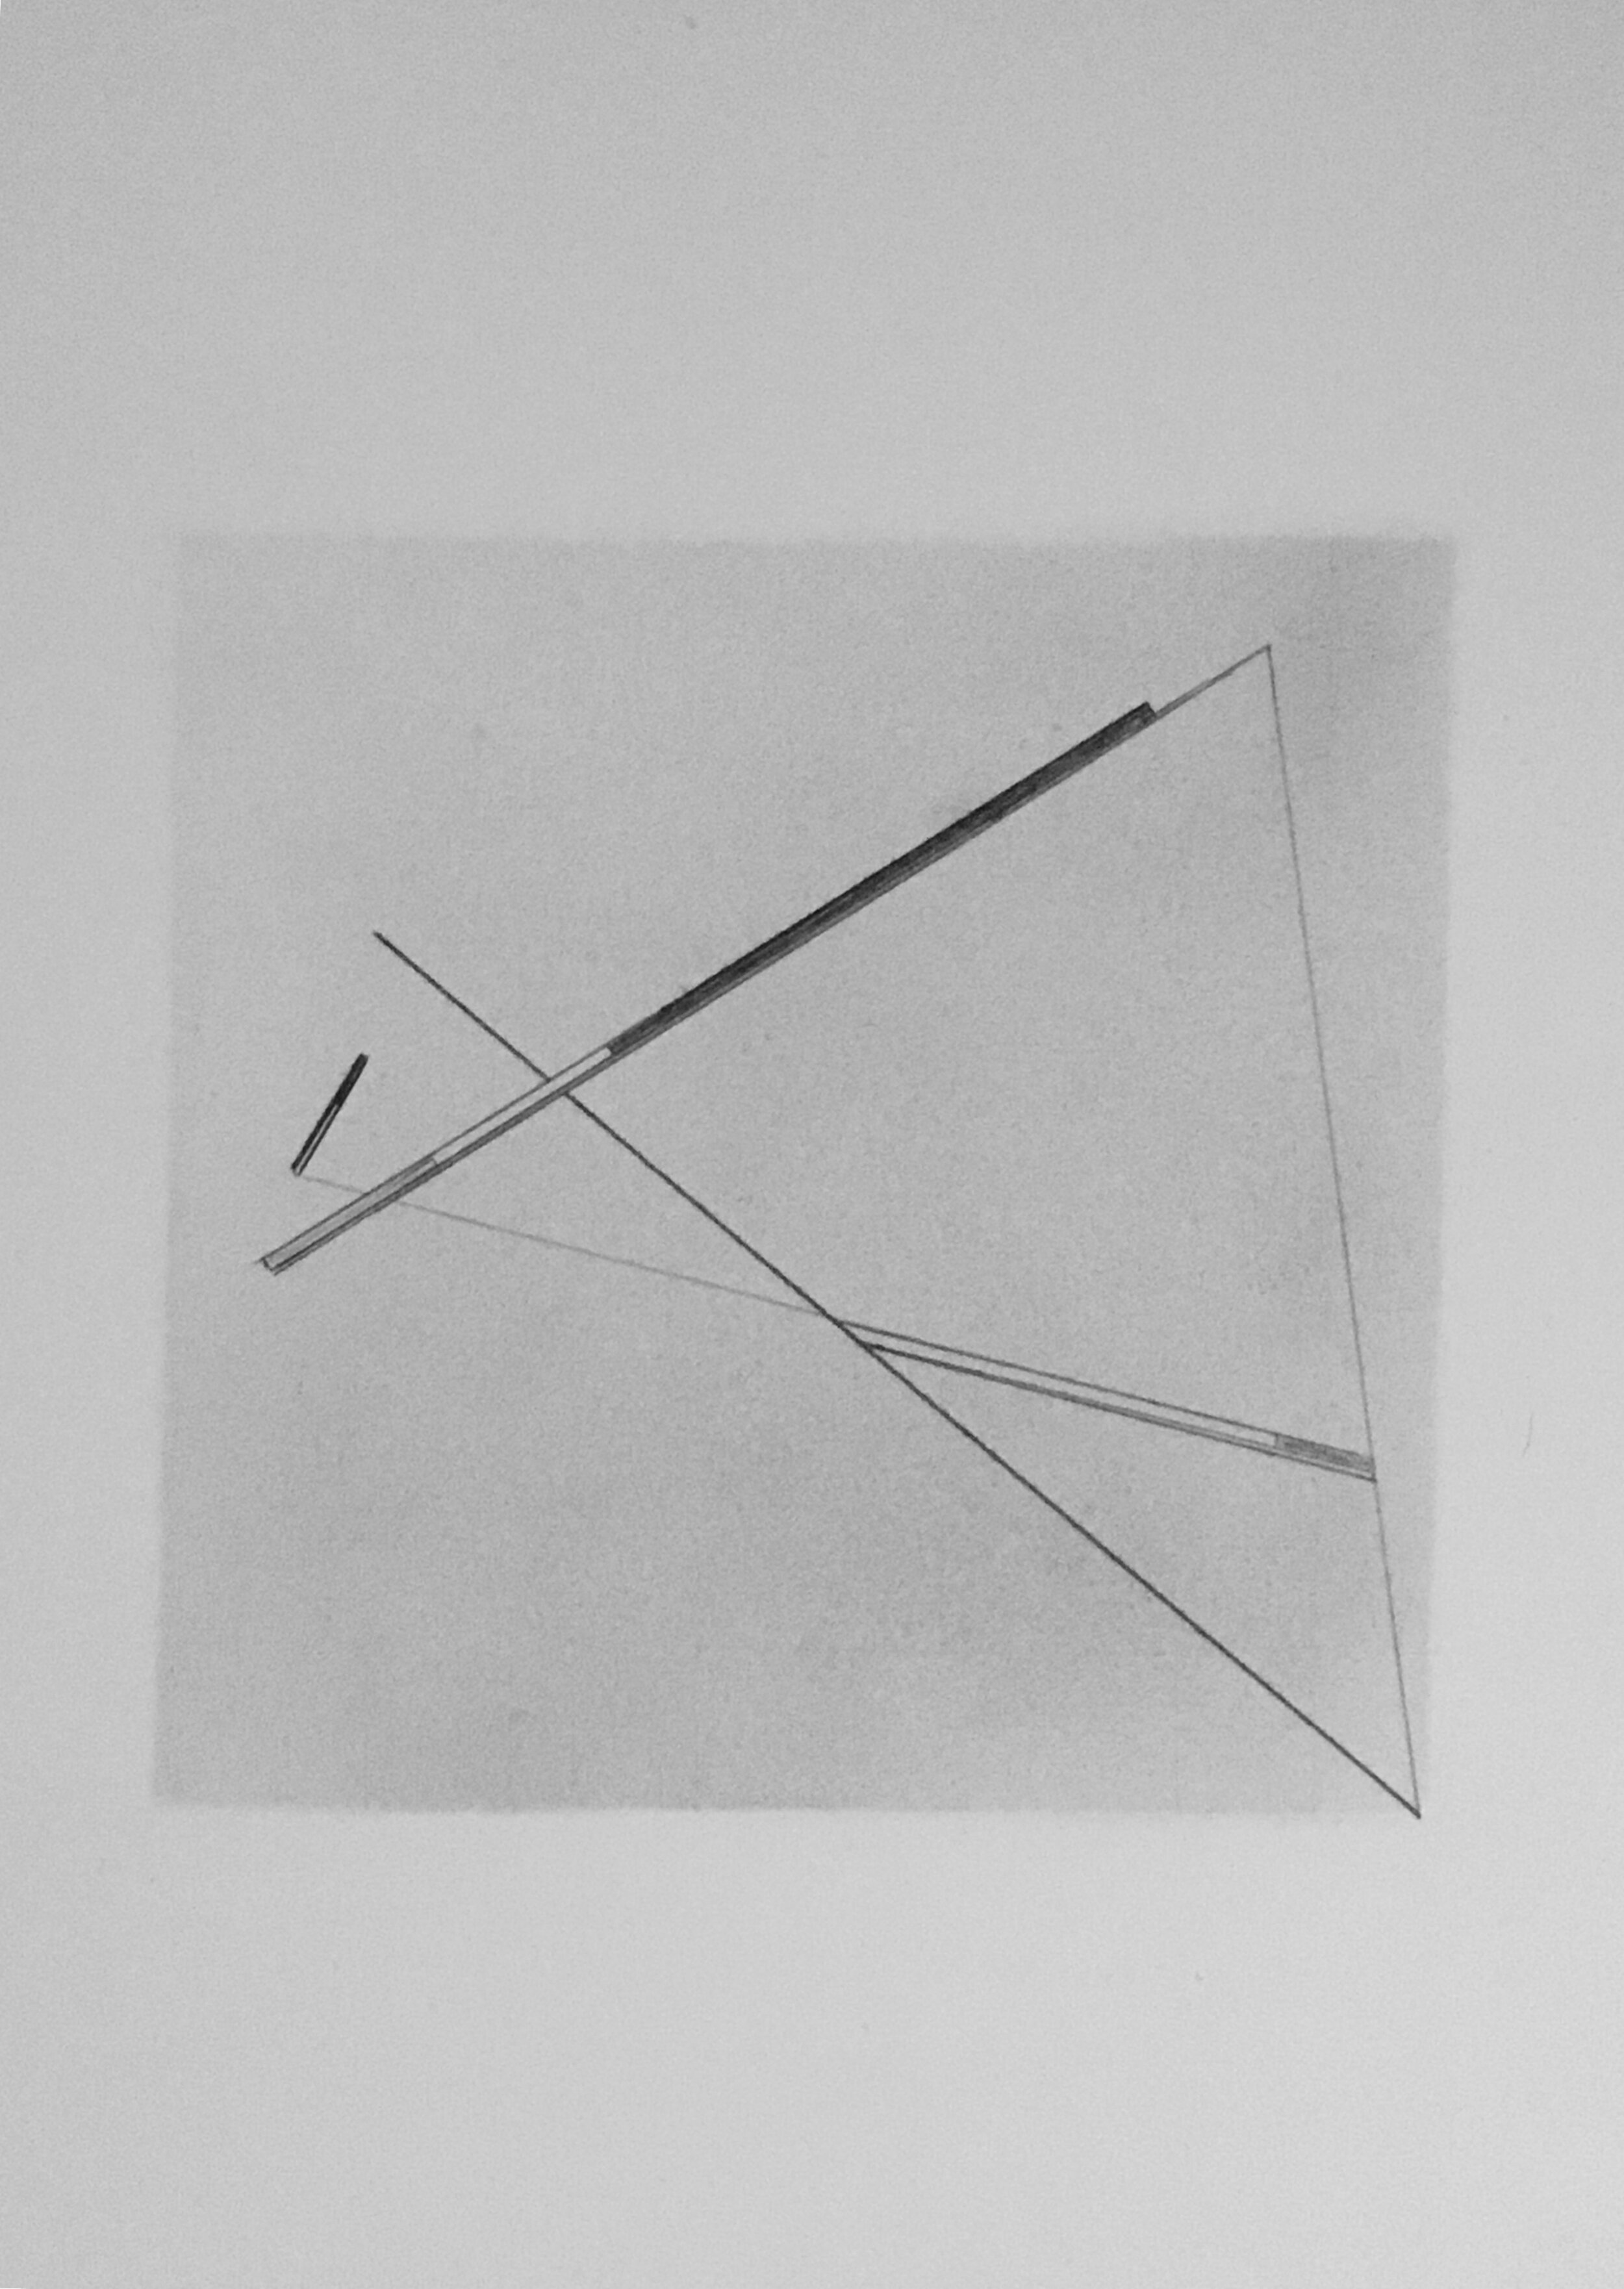   Bauhaus Study-no. 1-Line Compositions in the Character of a Triangle (Johannes Witten),  2019  graphite pencil on paper, 15” x 11” 